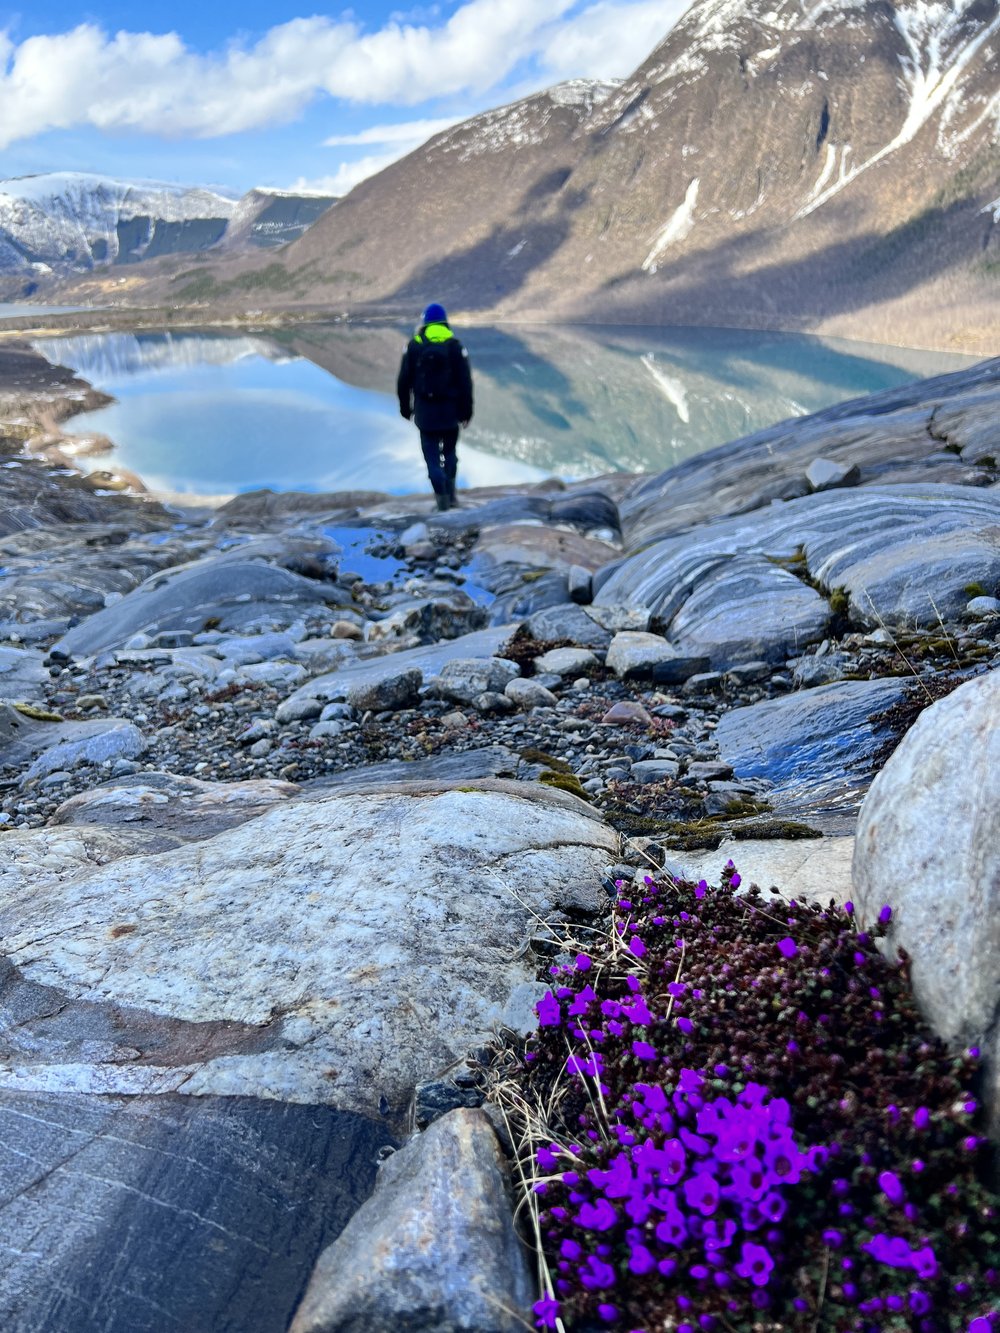  Natural lakes and pools on our way on top of Svartisen glacier. ©Belén Garcia Ovide 